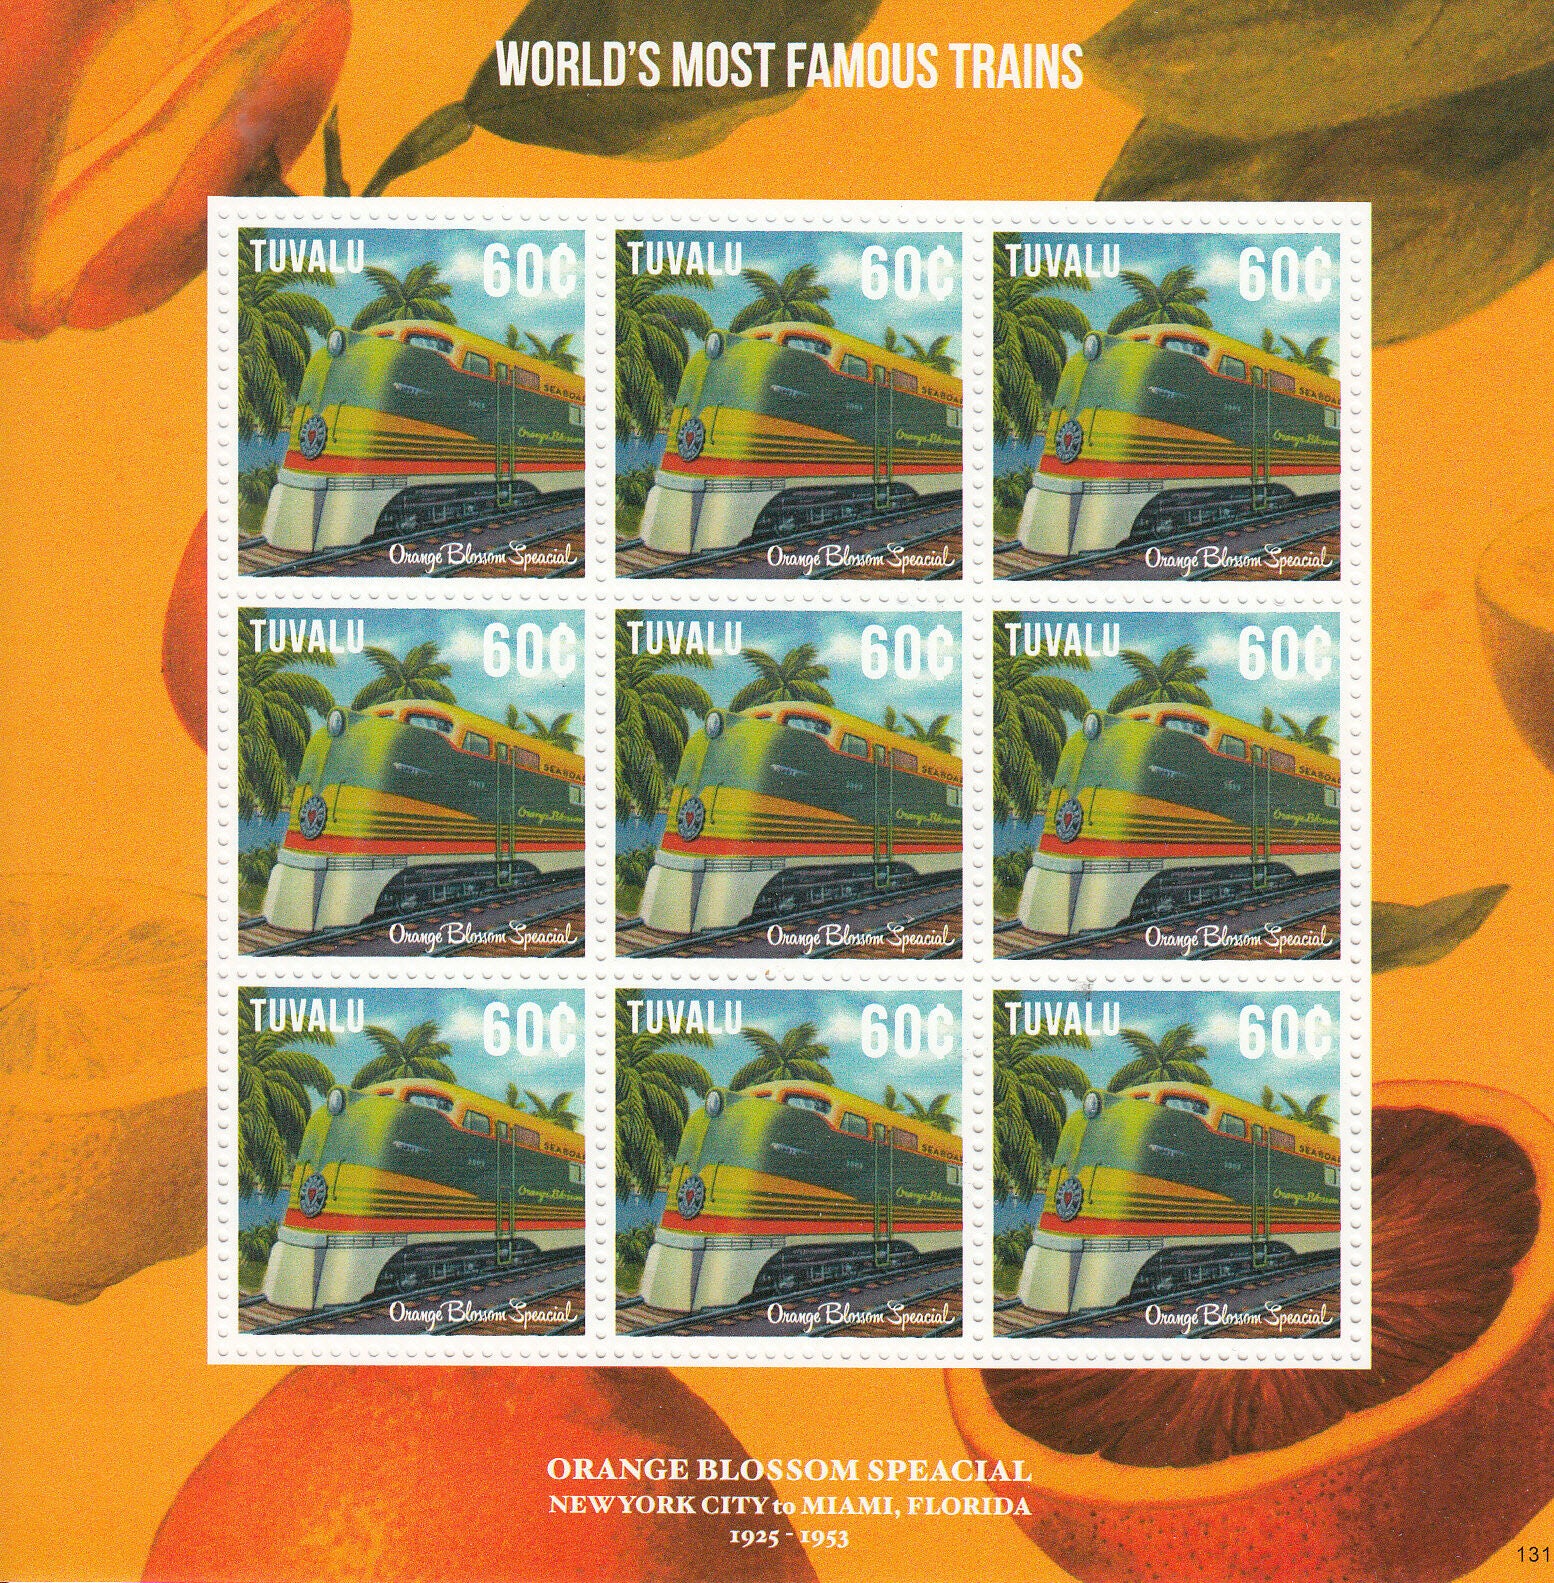 Tuvalu 2013 MNH World's Most Famous Trains 9v M/S Orange Blossom Special Stamps